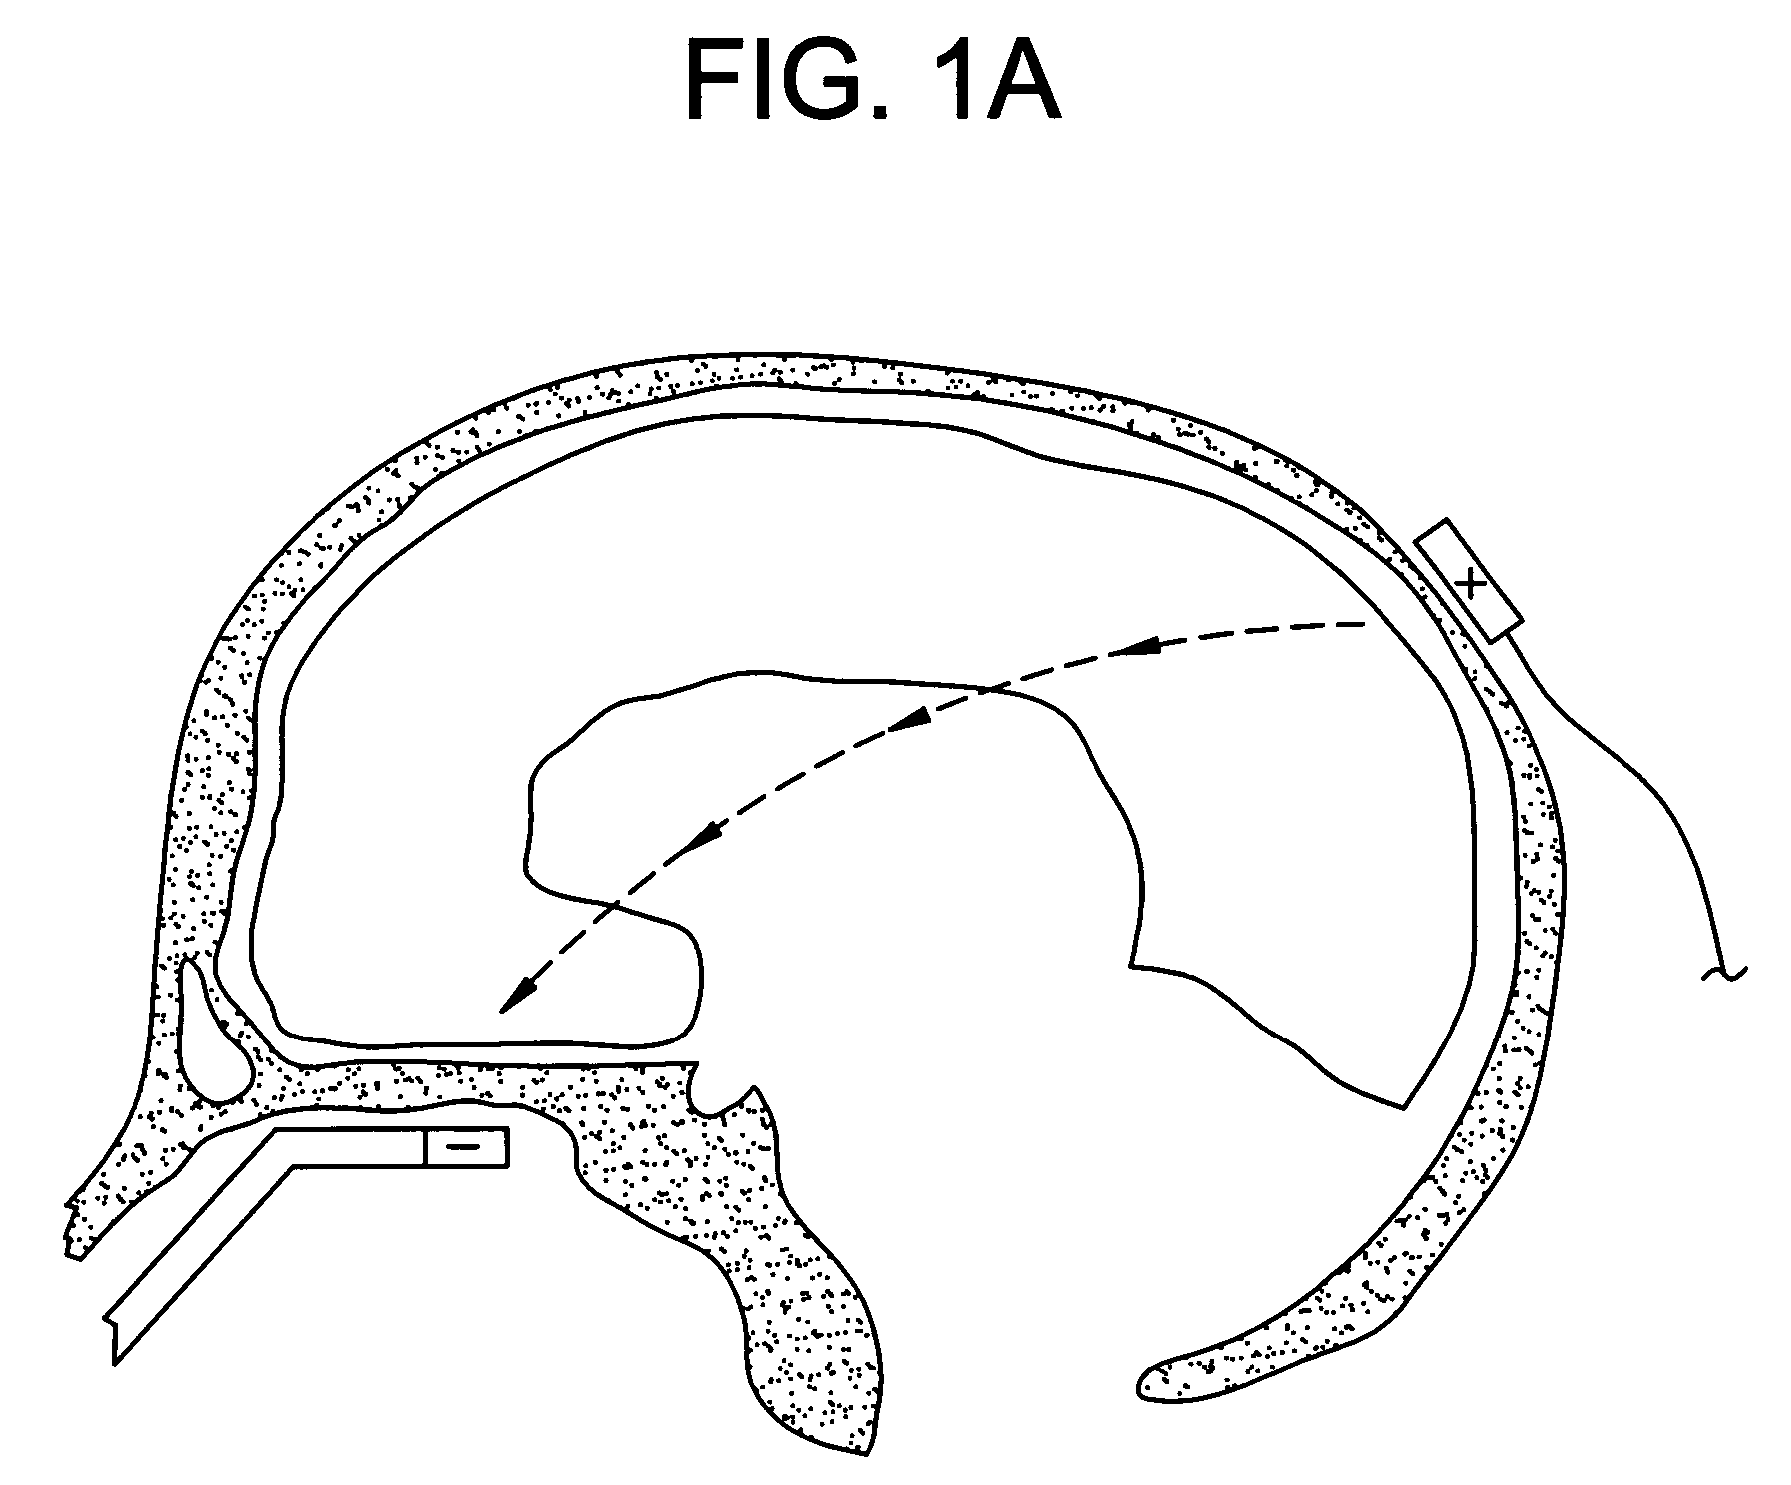 Method of removing deleterious charged molecules from brain tissue